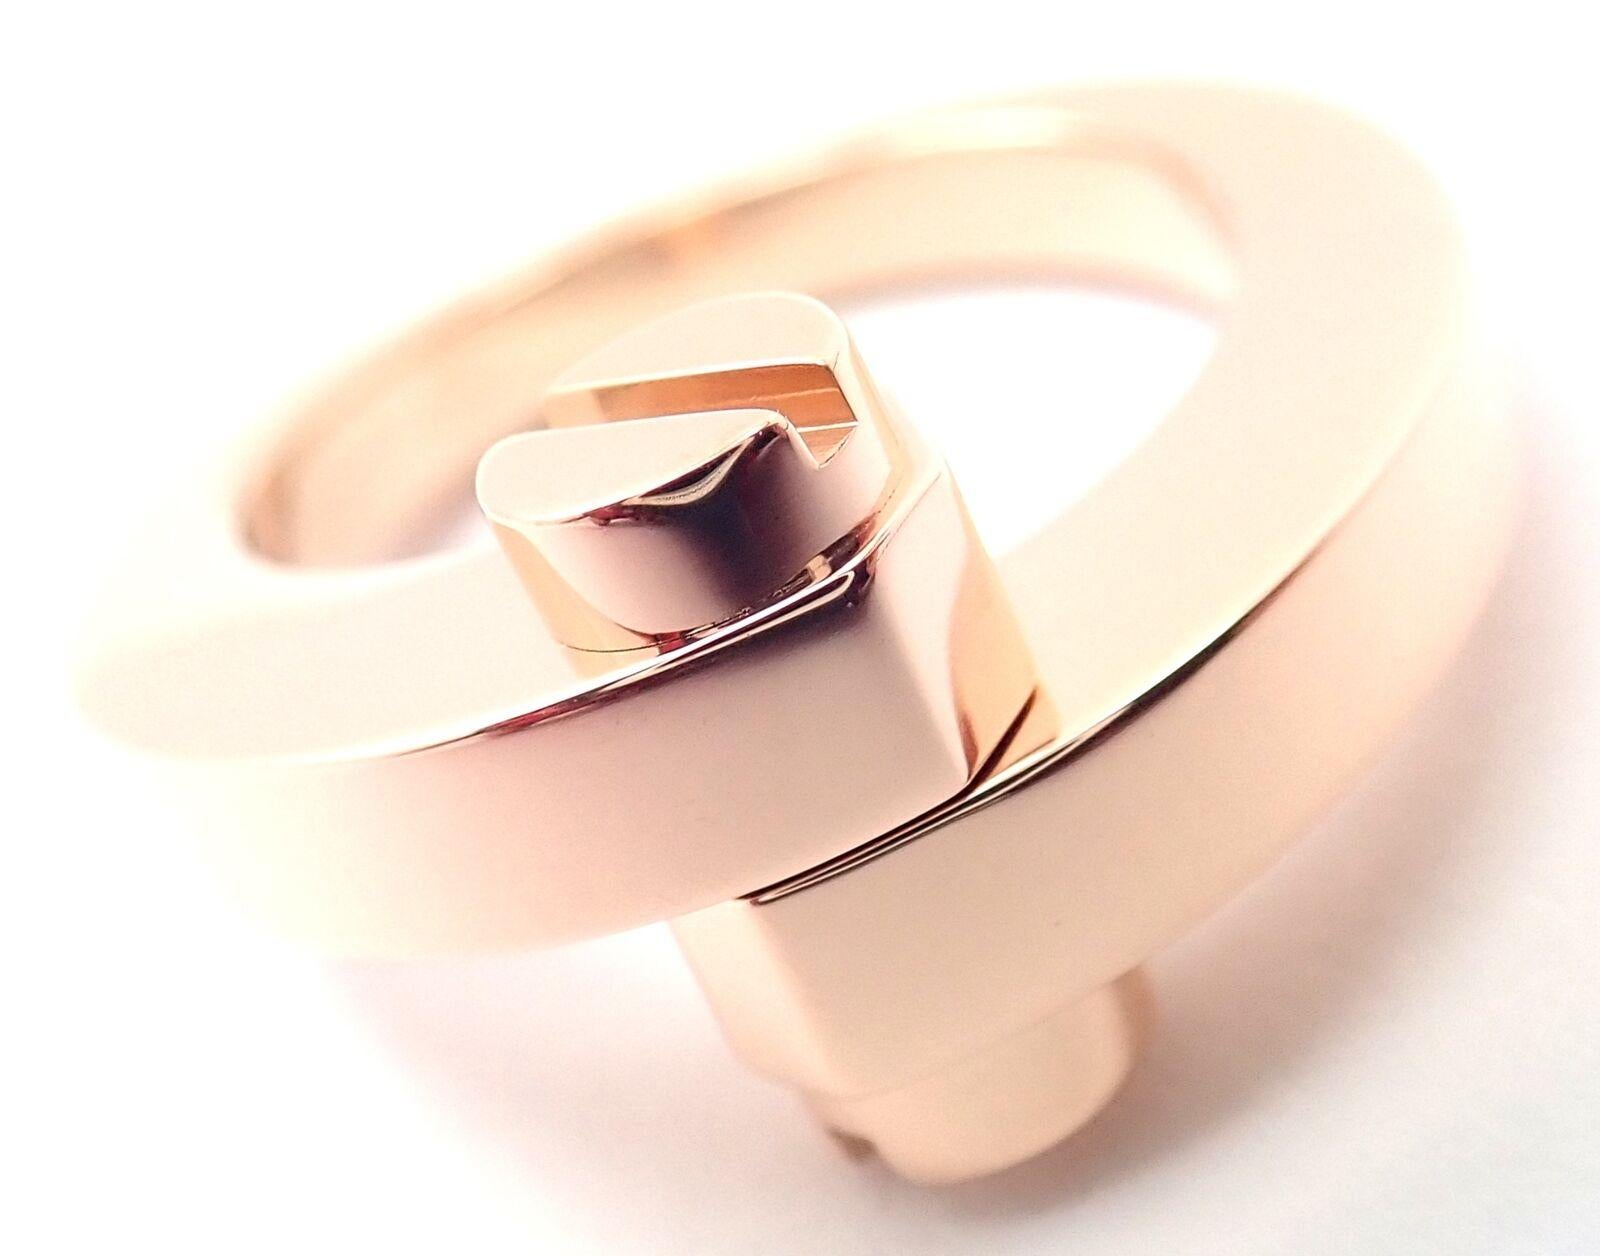 18k Rose Gold Menotte Band Ring by Cartier. 
Details: 
Ring Size: Europe size 52, US size 6
Weight: 14.2 grams
Width: 12mm
Stamped Hallmarks: Cartier 750 52 BK2580
*Shipping within the United States* 
YOUR PRICE: $3,250
T3032mned